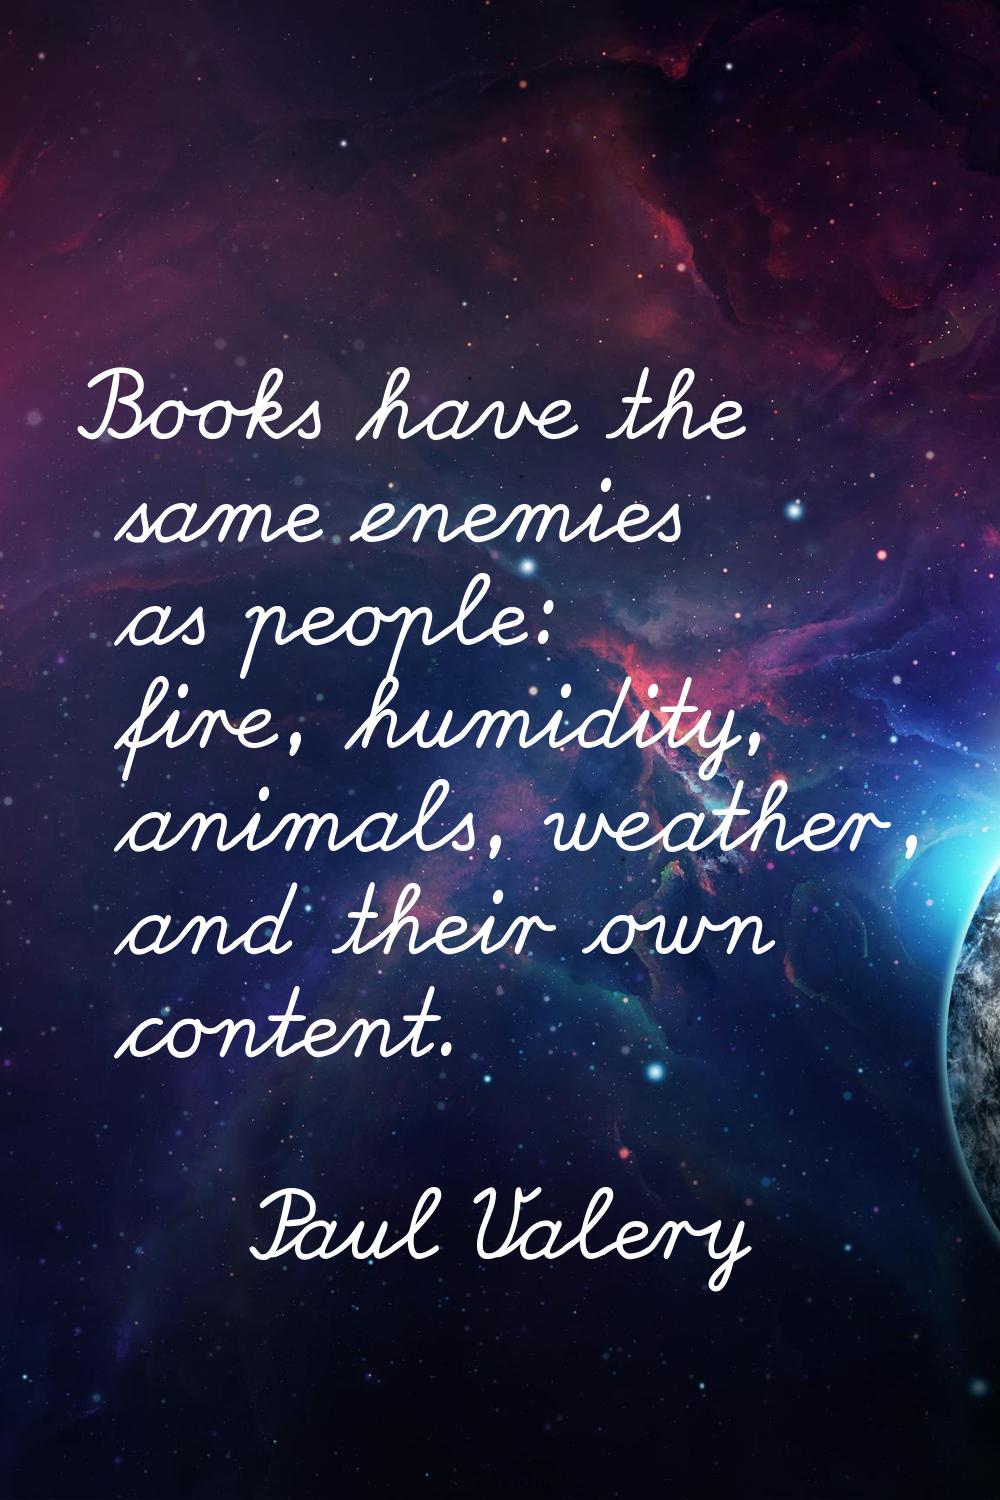 Books have the same enemies as people: fire, humidity, animals, weather, and their own content.